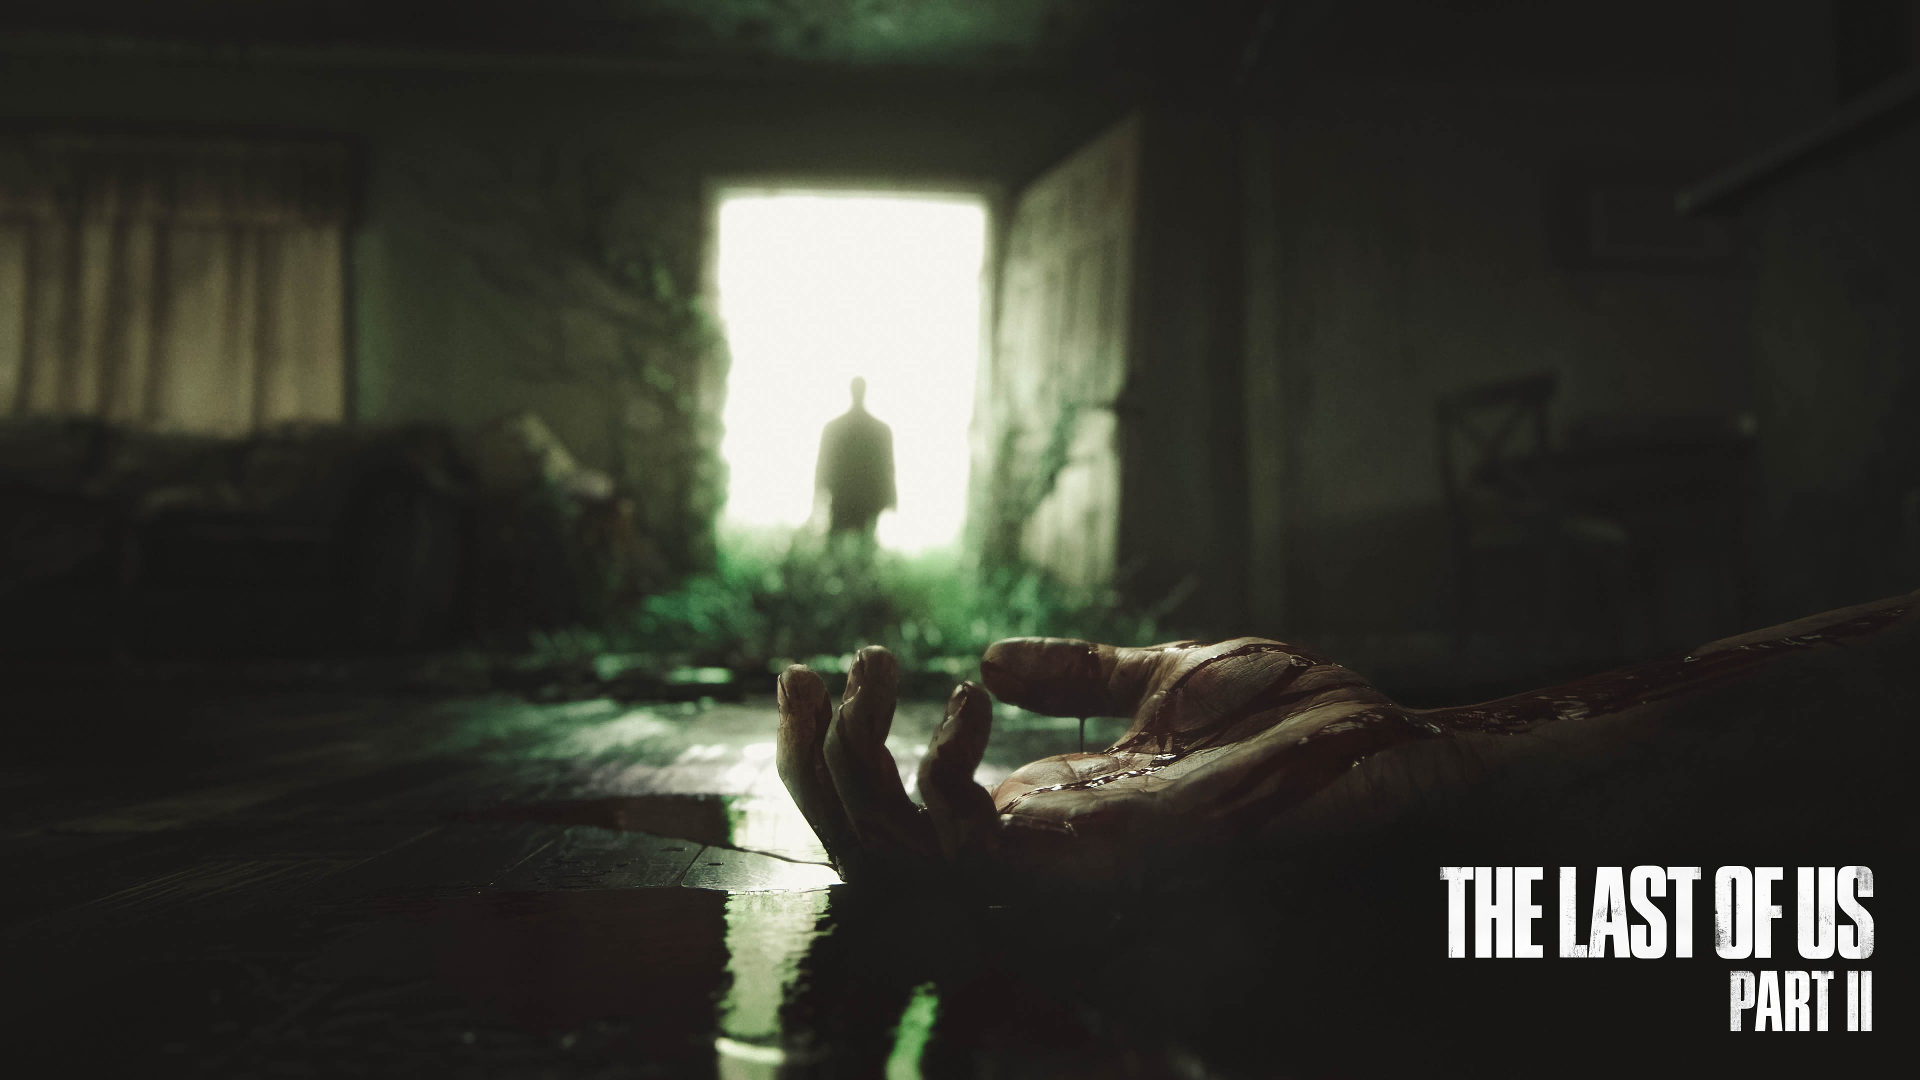 The Last of Us Part II HD Wallpapers and Background Images   stmednet